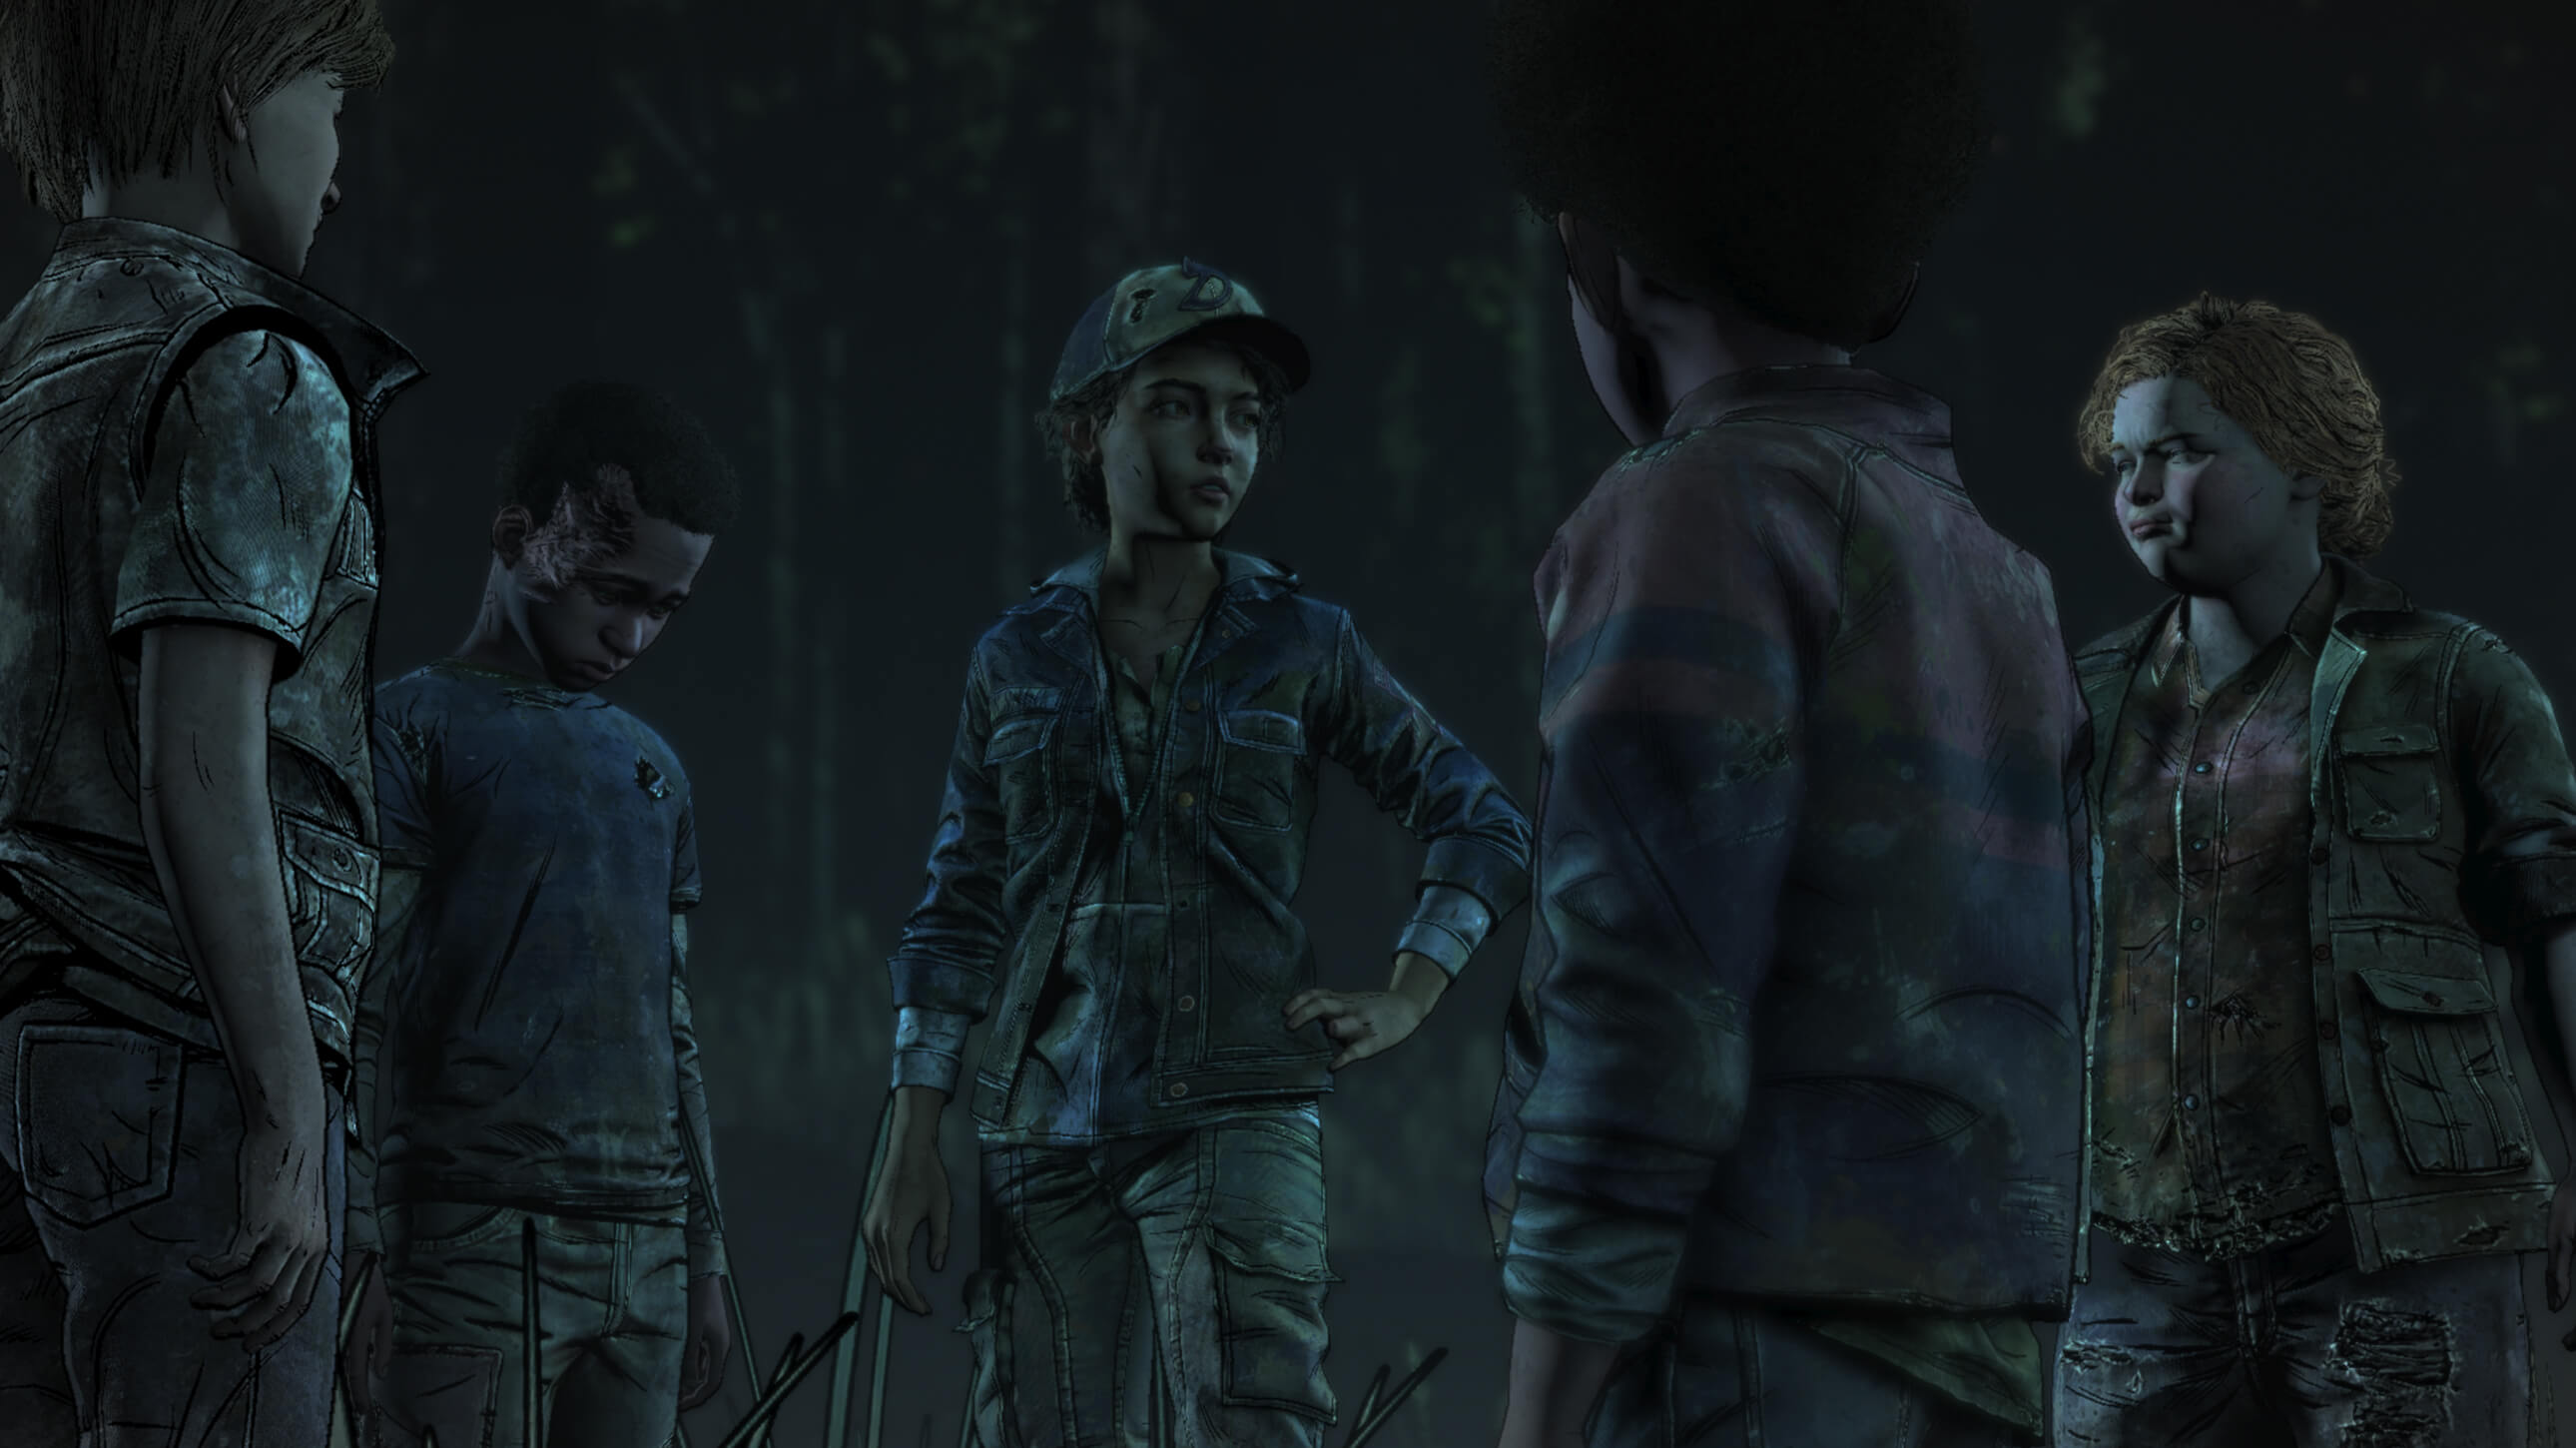 Image for The Walking Dead: Episode 4 release date announced for March